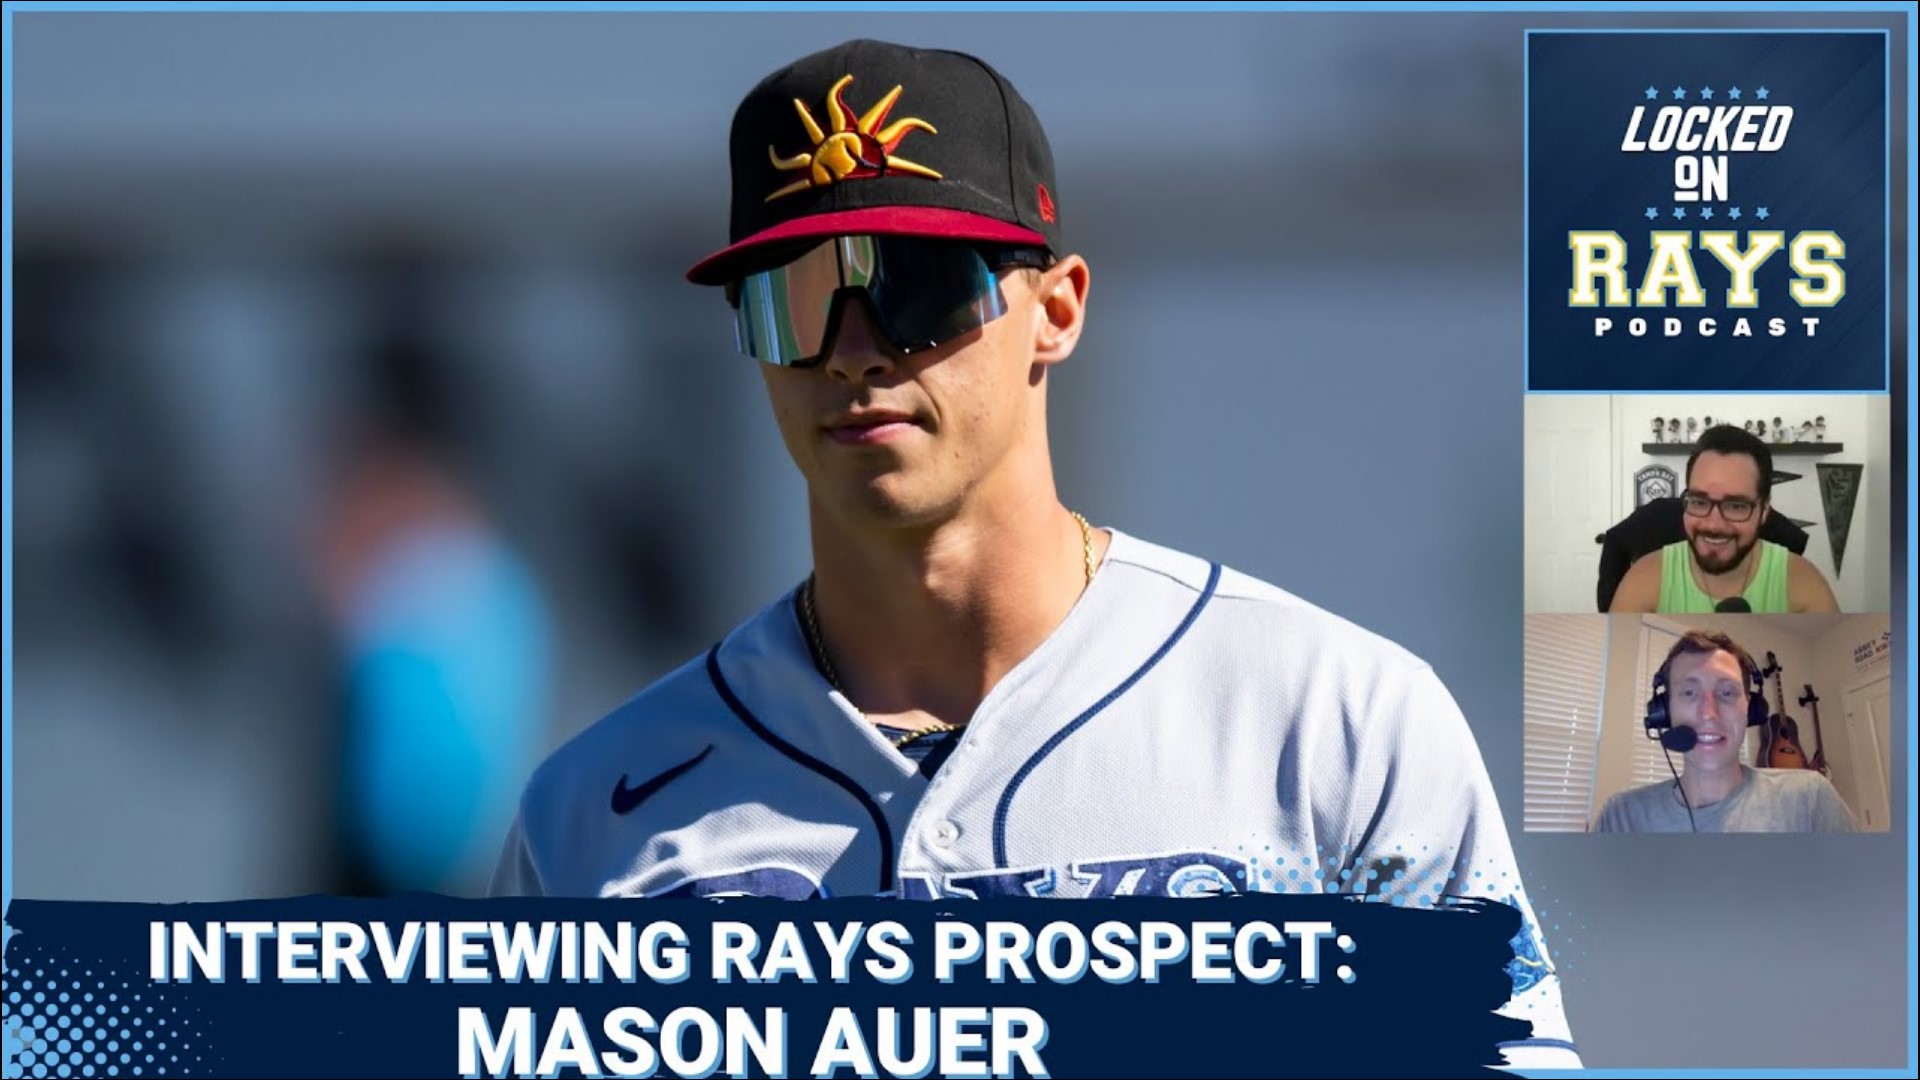 Mason joins Locked On Rays and shares his off-season regimen, his 2023 goals and his experience as a professional baseball player.